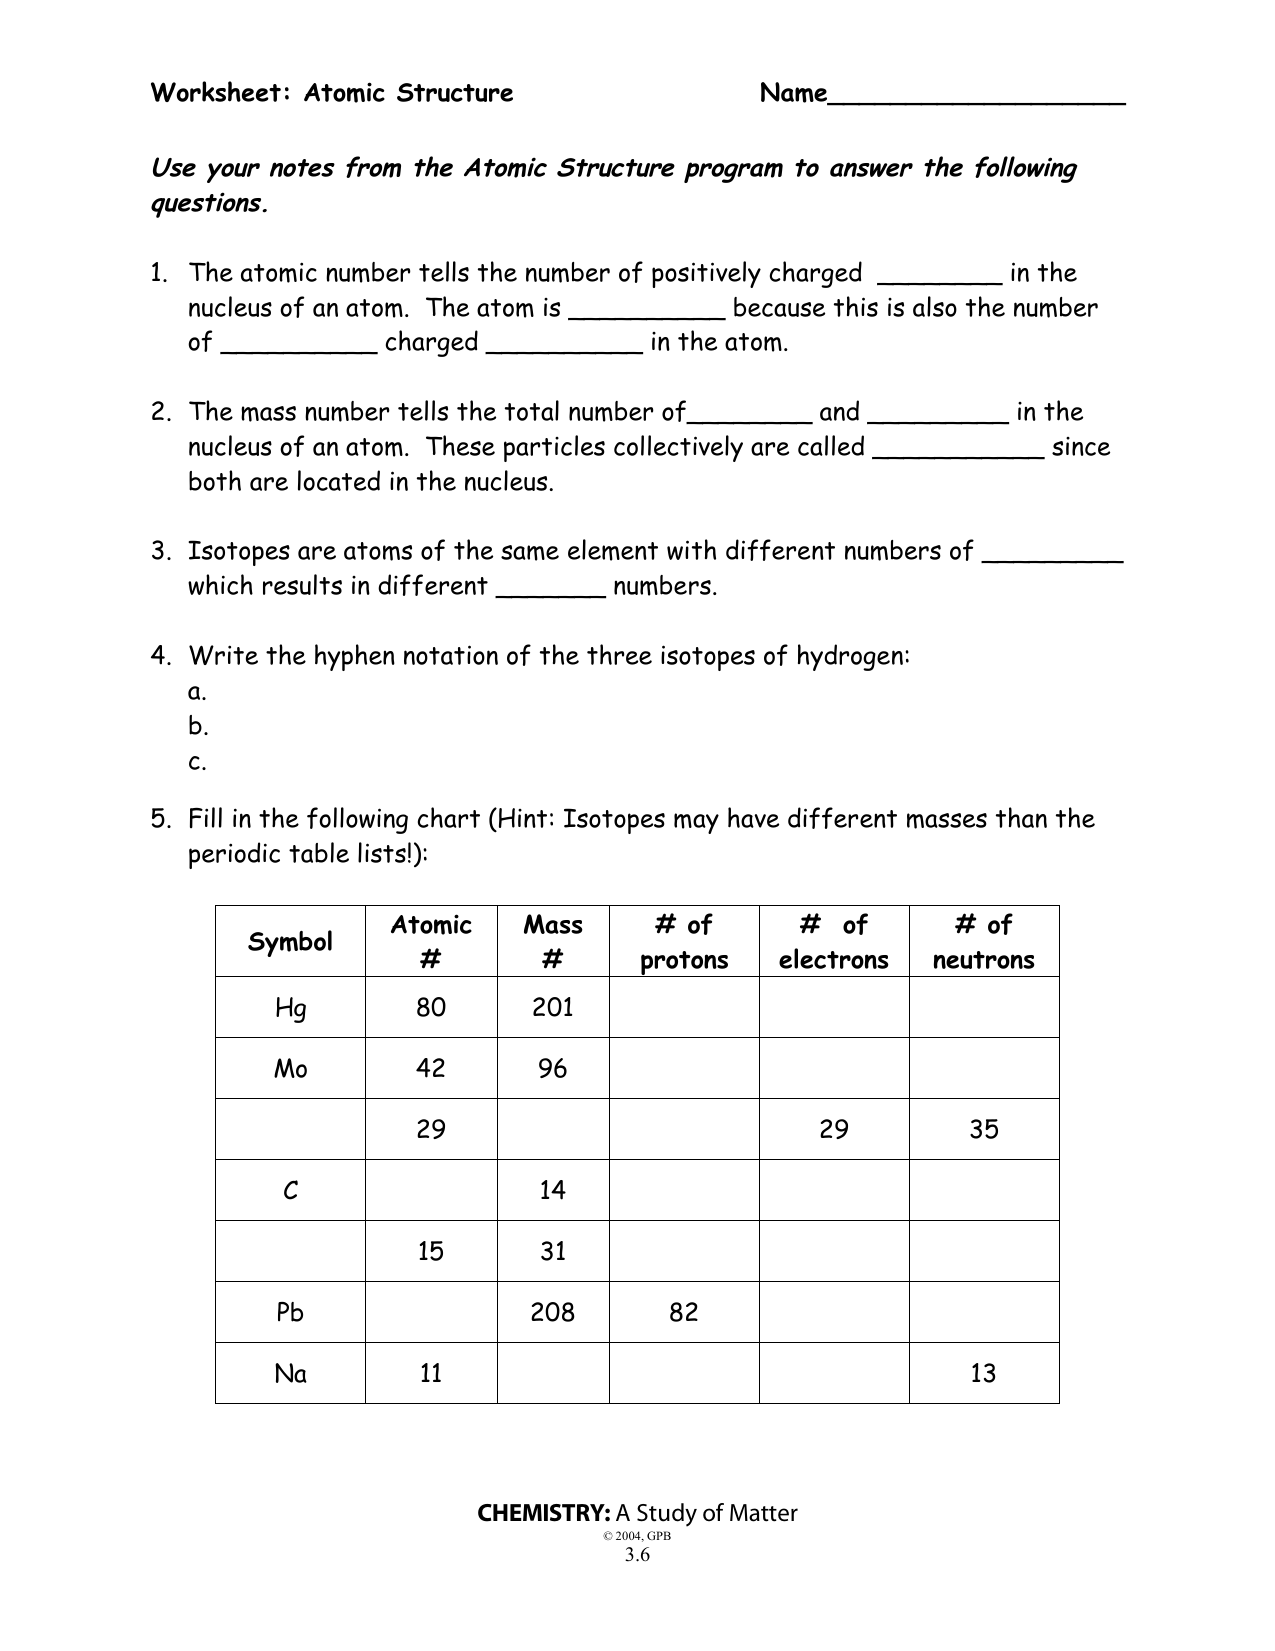 Atomic Structure Worksheet In Atomic Structure Worksheet Answers